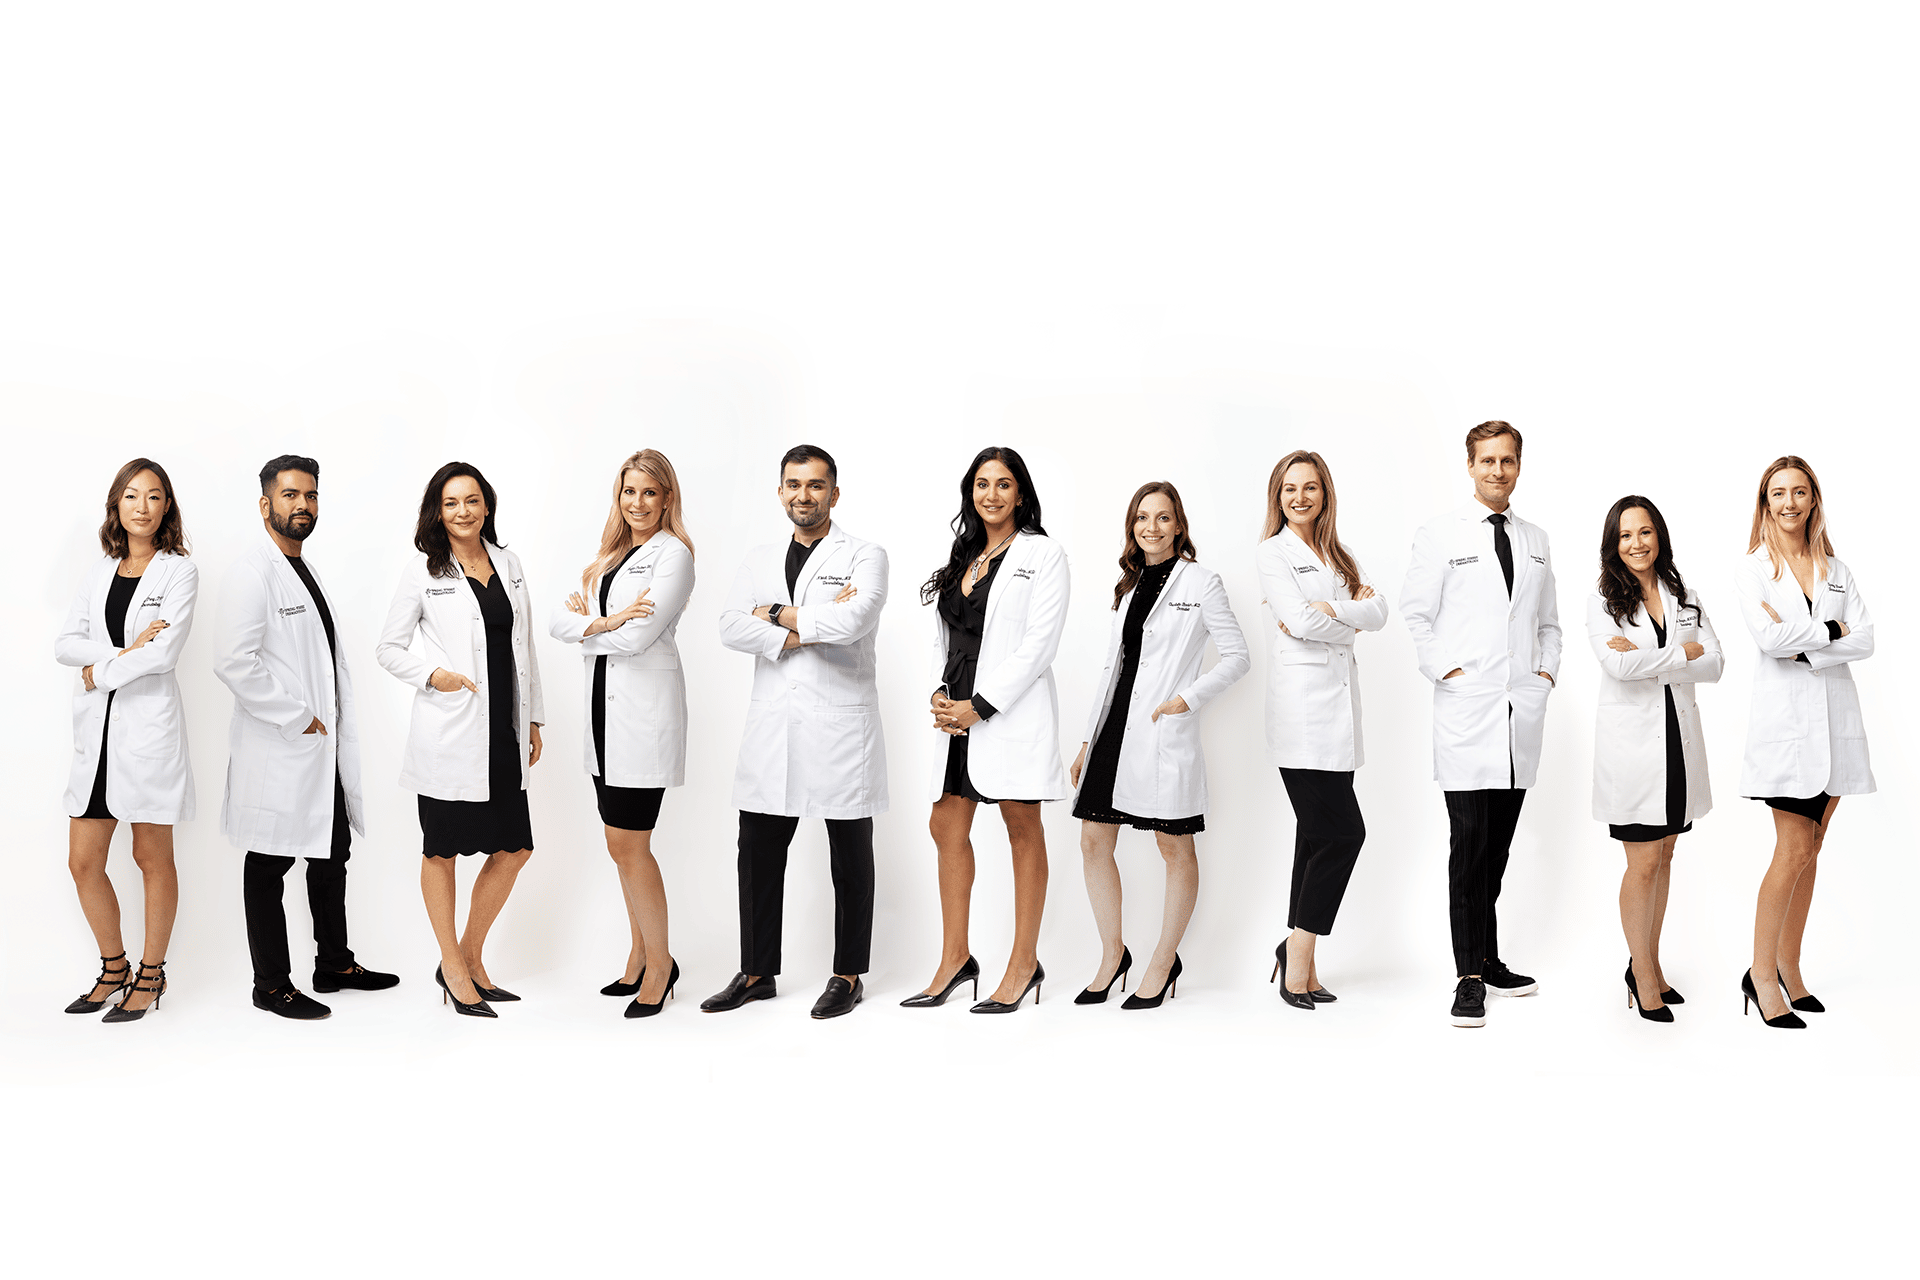 Group photo of Board Certified Dermatologists at Spring Street Dermatology, New York City, NY.